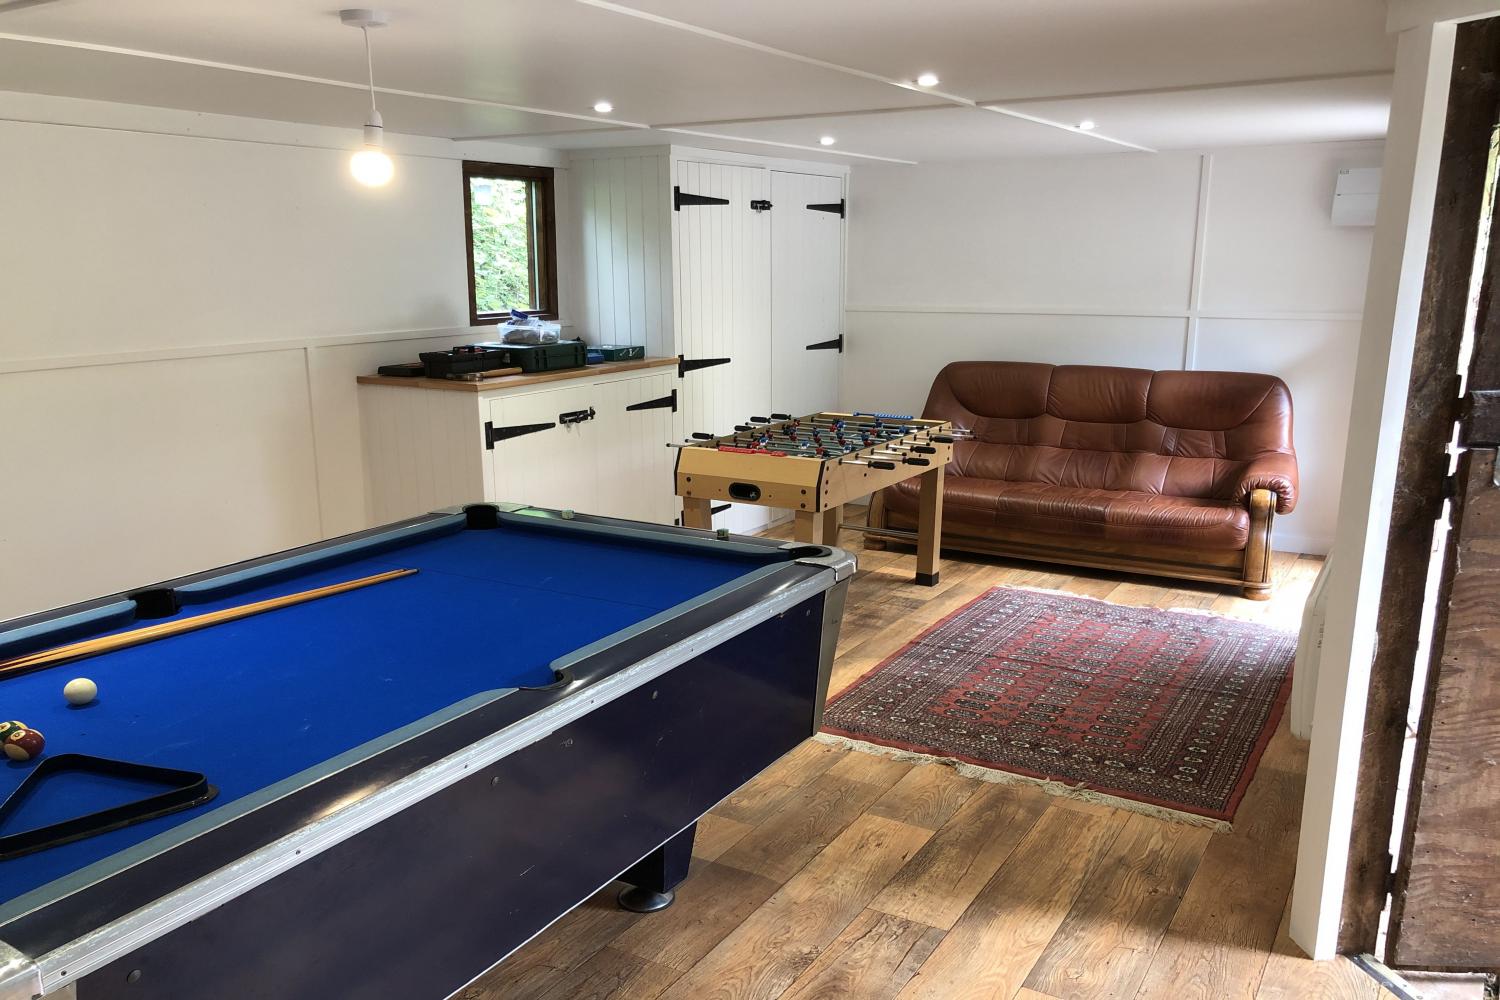 Games room - relax and have fun!